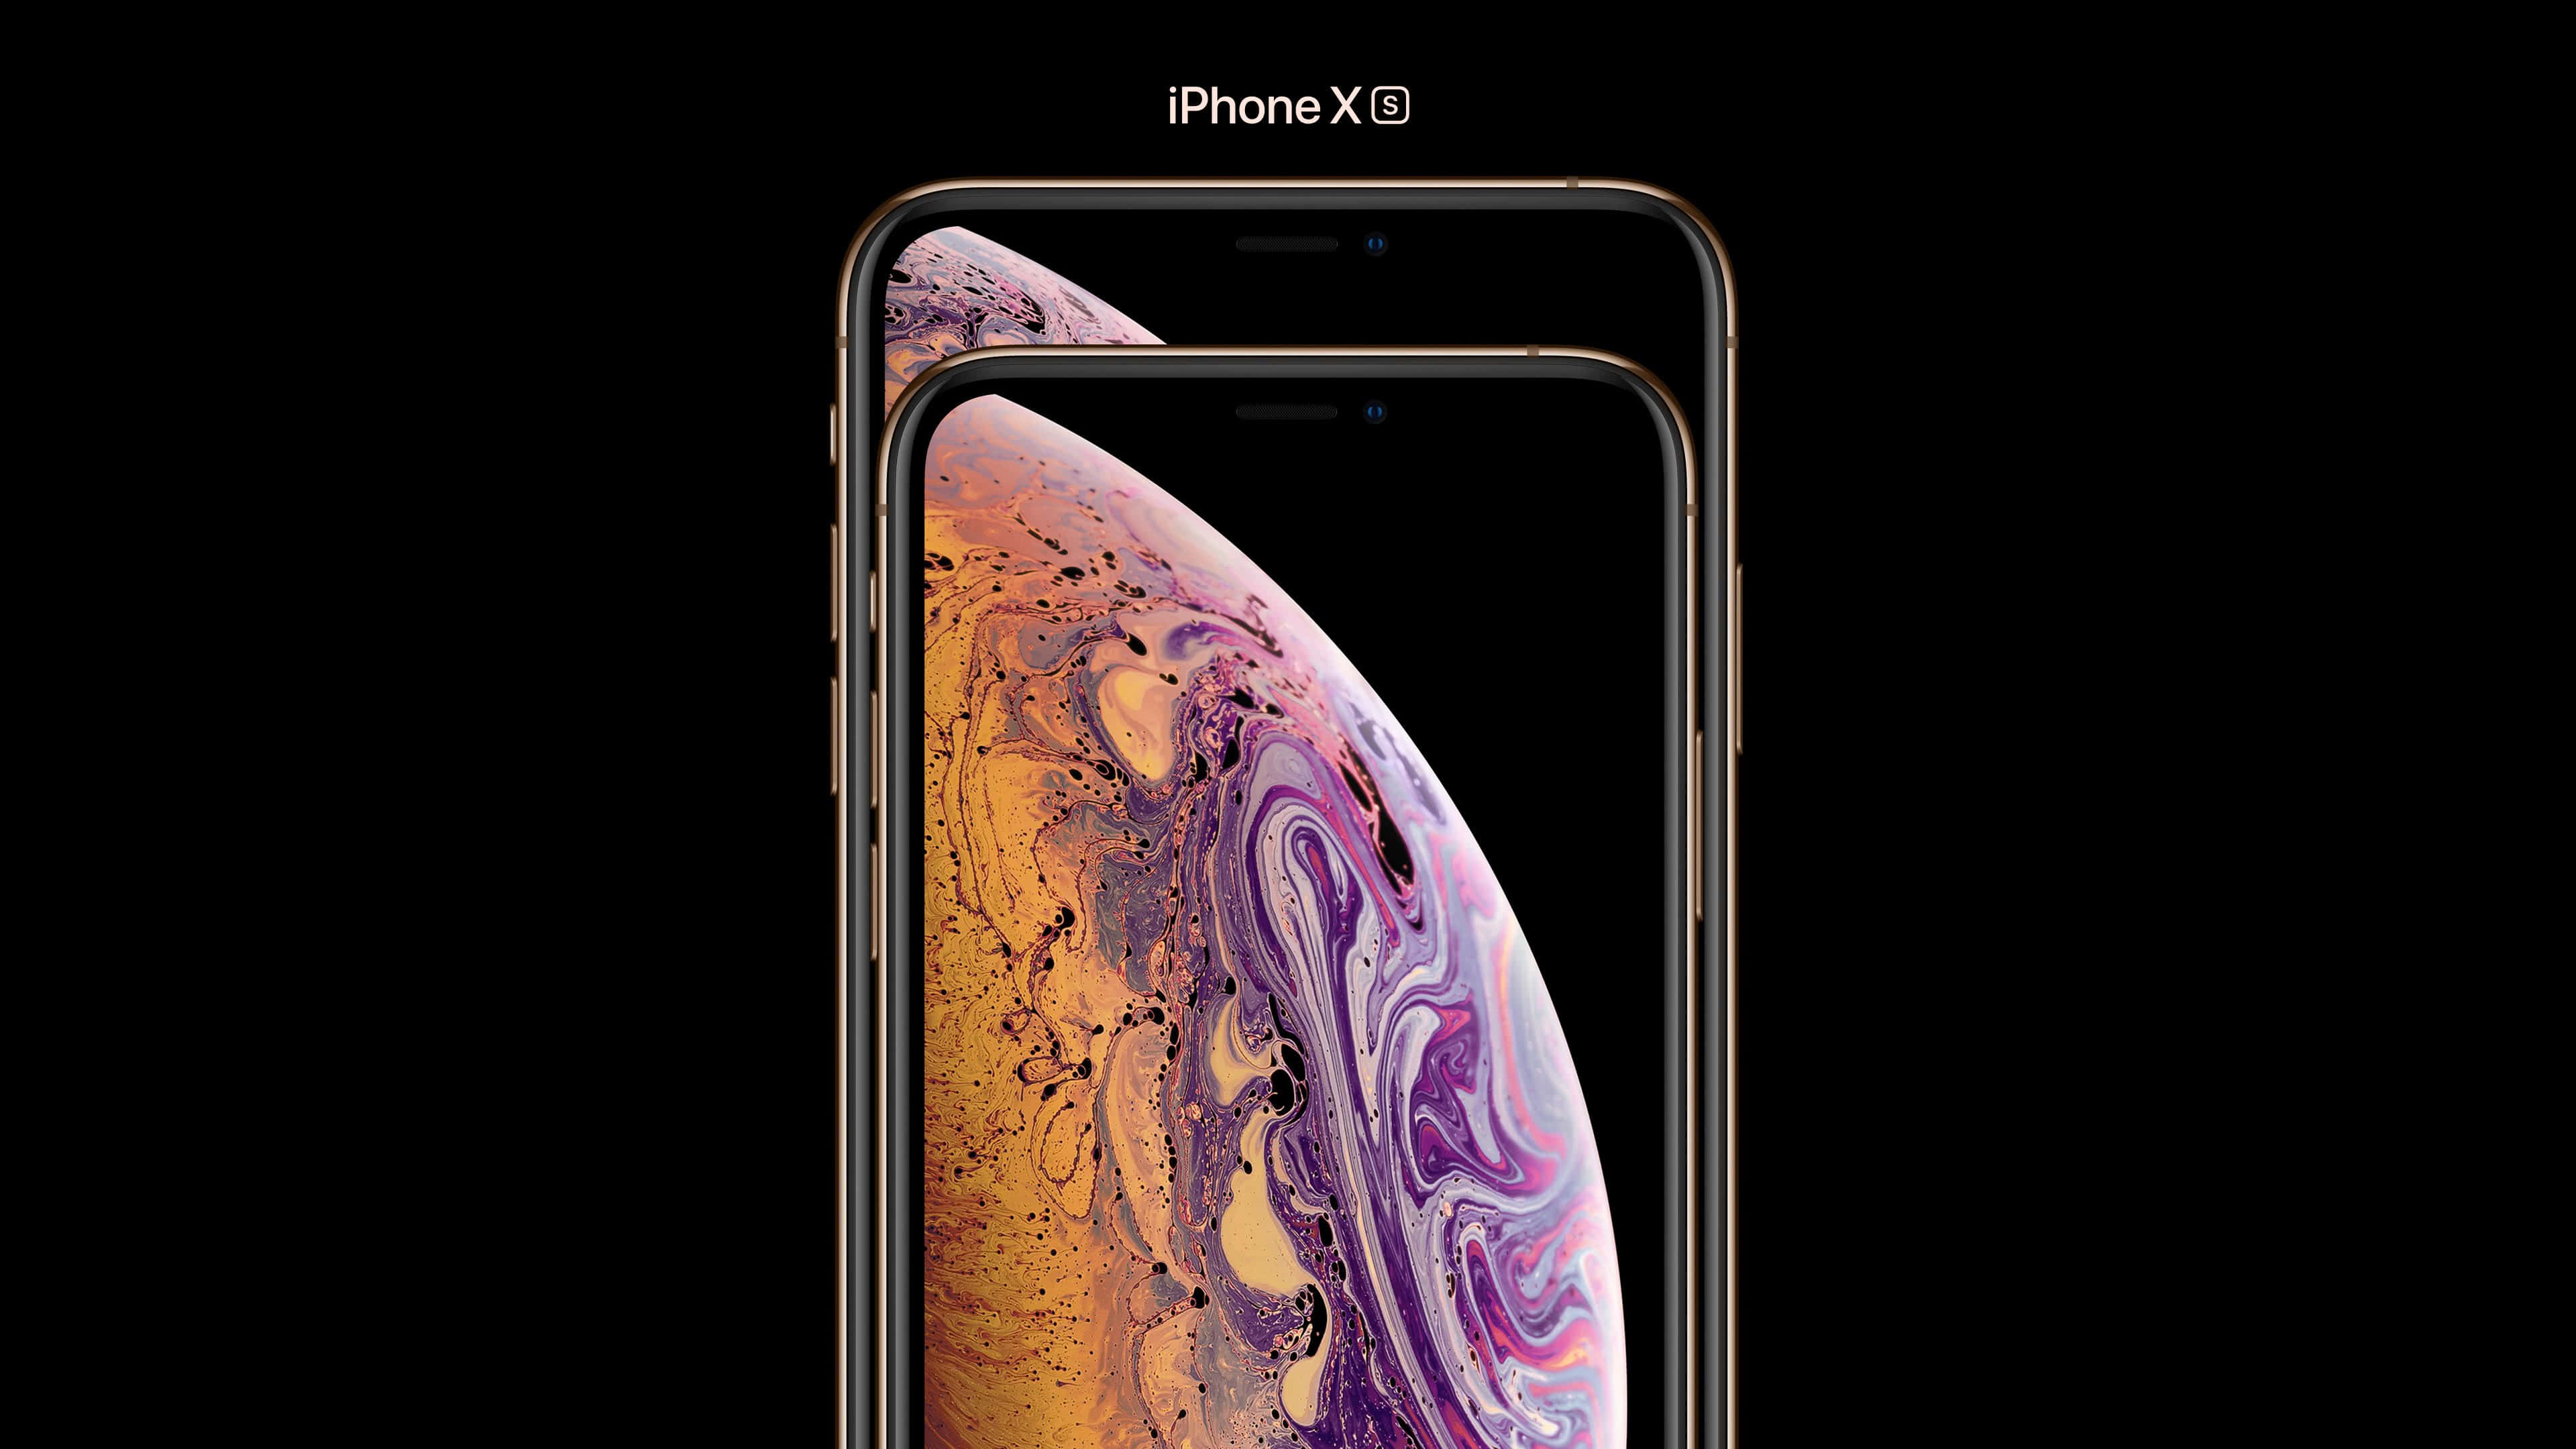 Apple Iphone Xs Max Gold Front Uhd 4k Wallpaper - Ultra Hd Wallpapers  Iphone Xs Max 4k - 3840x2160 Wallpaper 